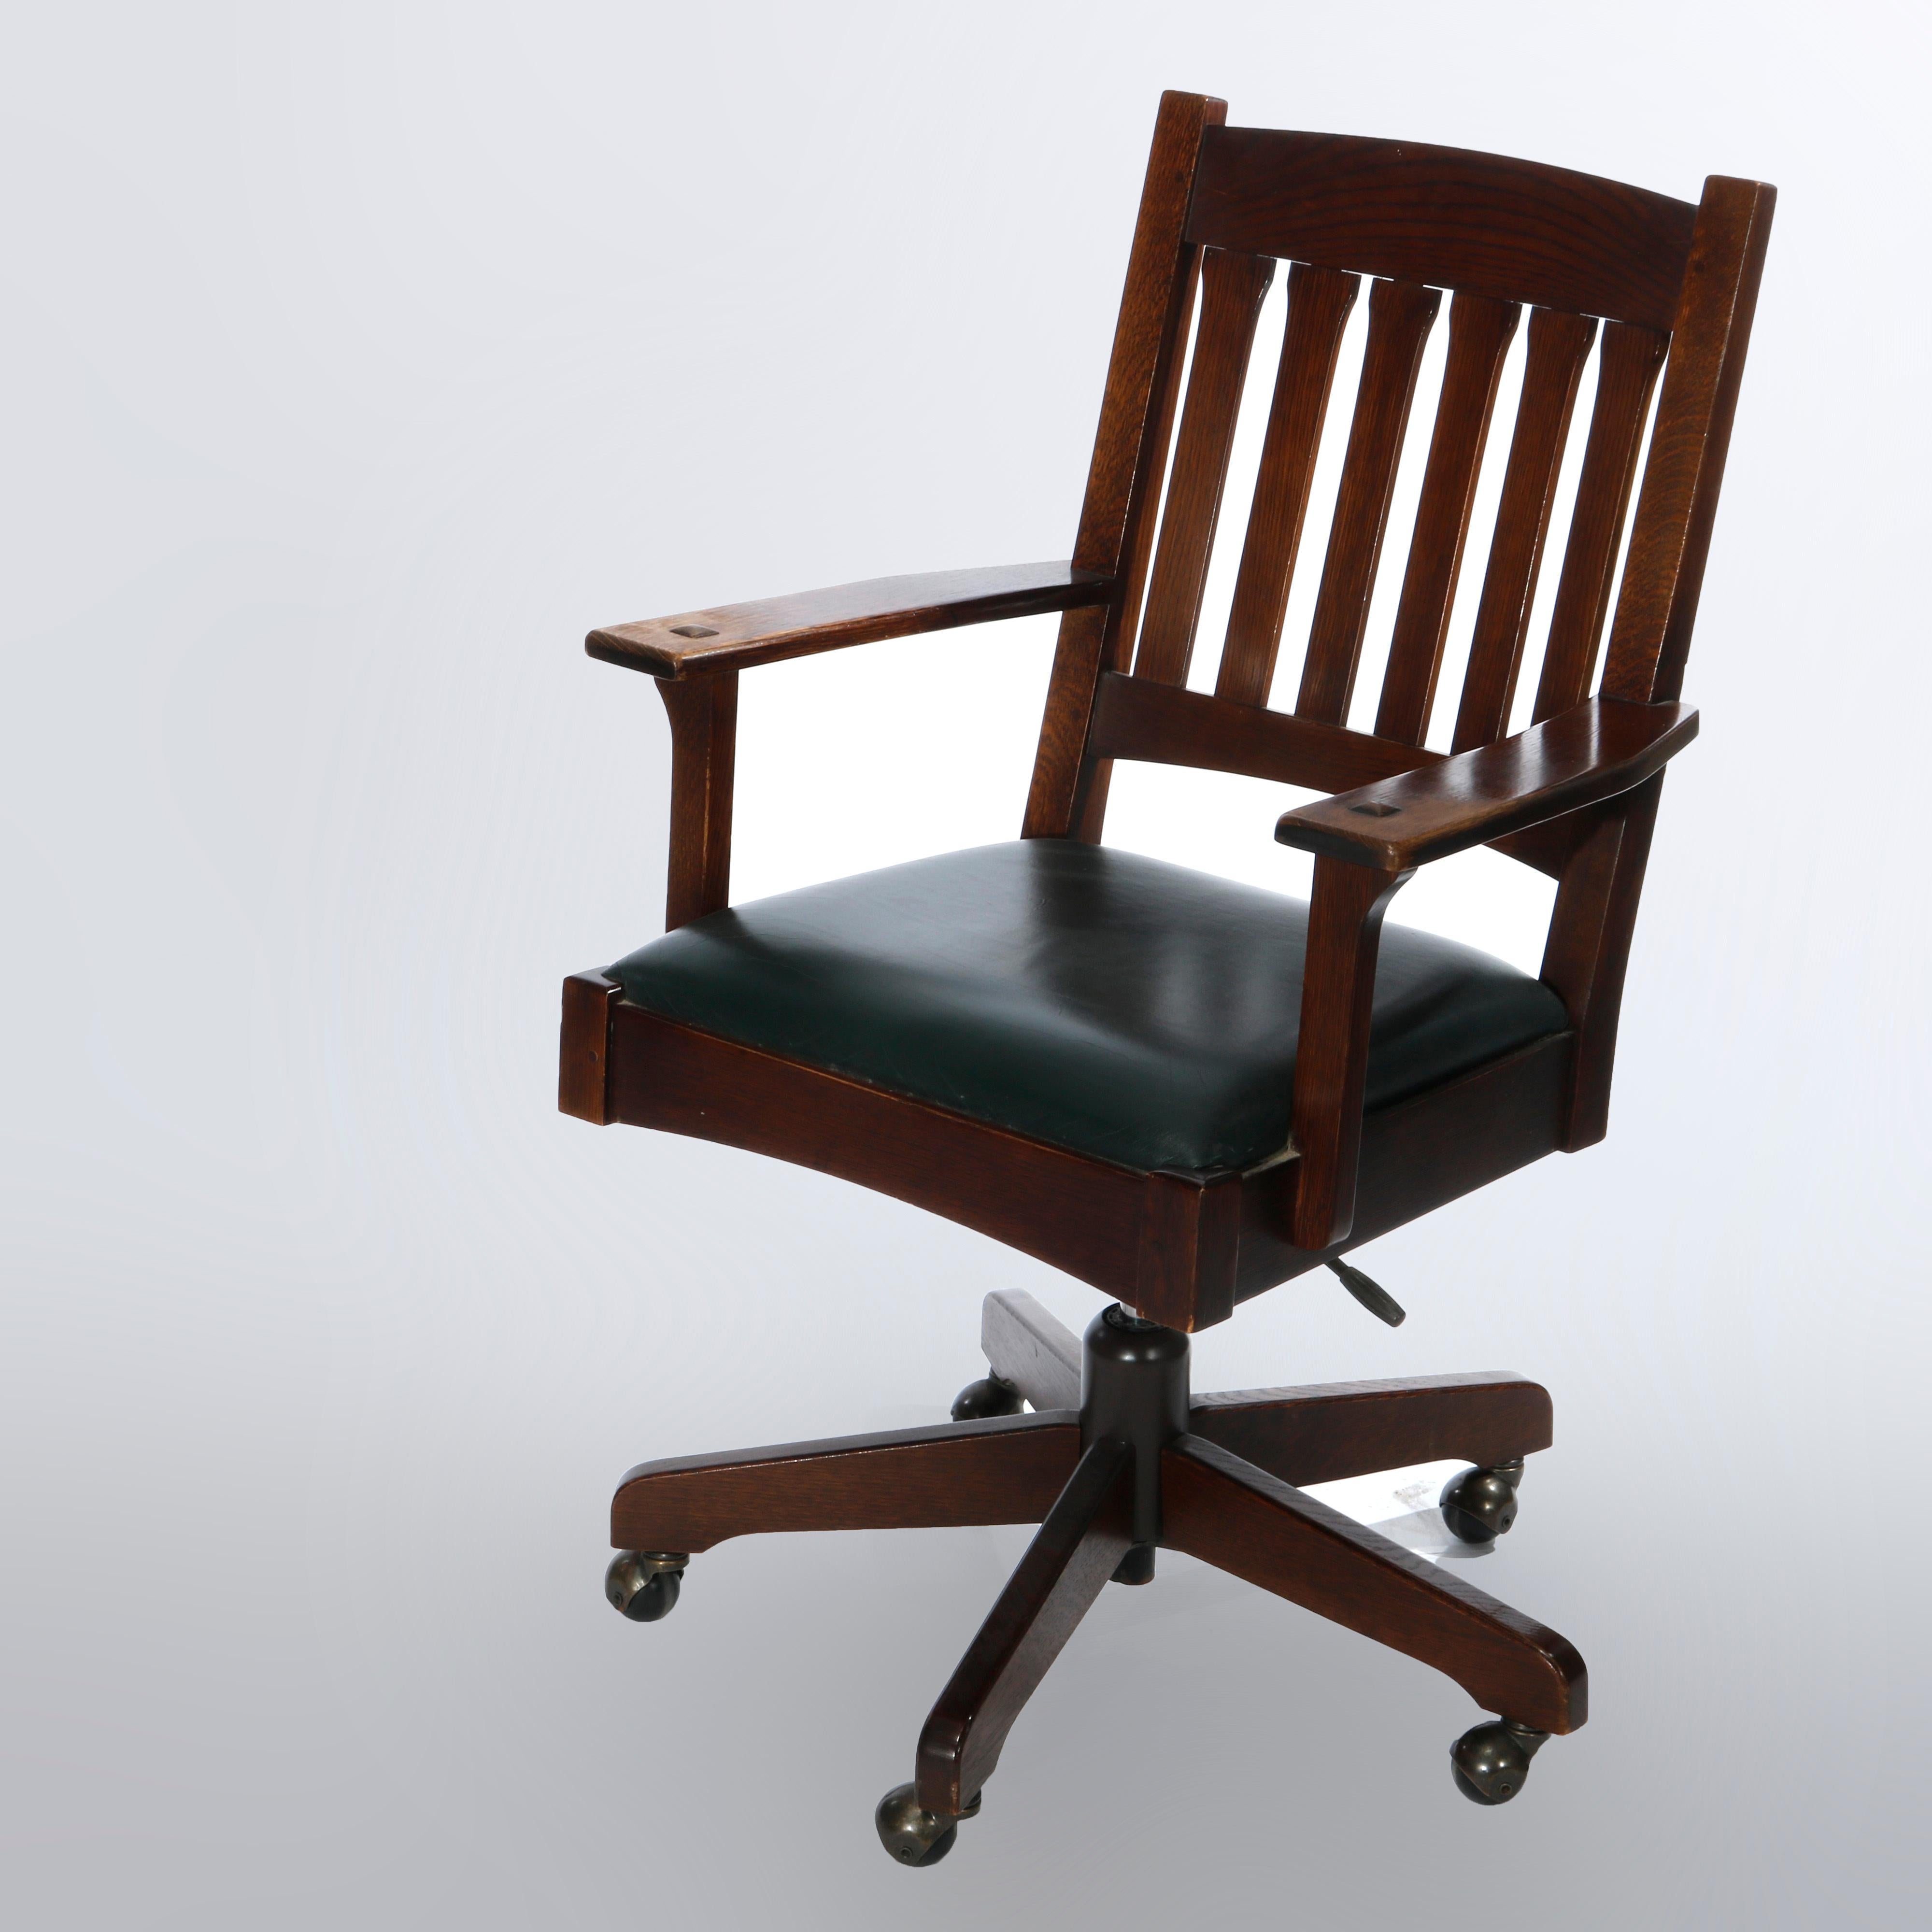 An Arts & Crafts Mission office chair in the manner of Stickely offers oak construction with slat back over covered seat and flat arms with pyramidal element at joint, swivel and telescoping rolling base, maker marks as photographed, 20th